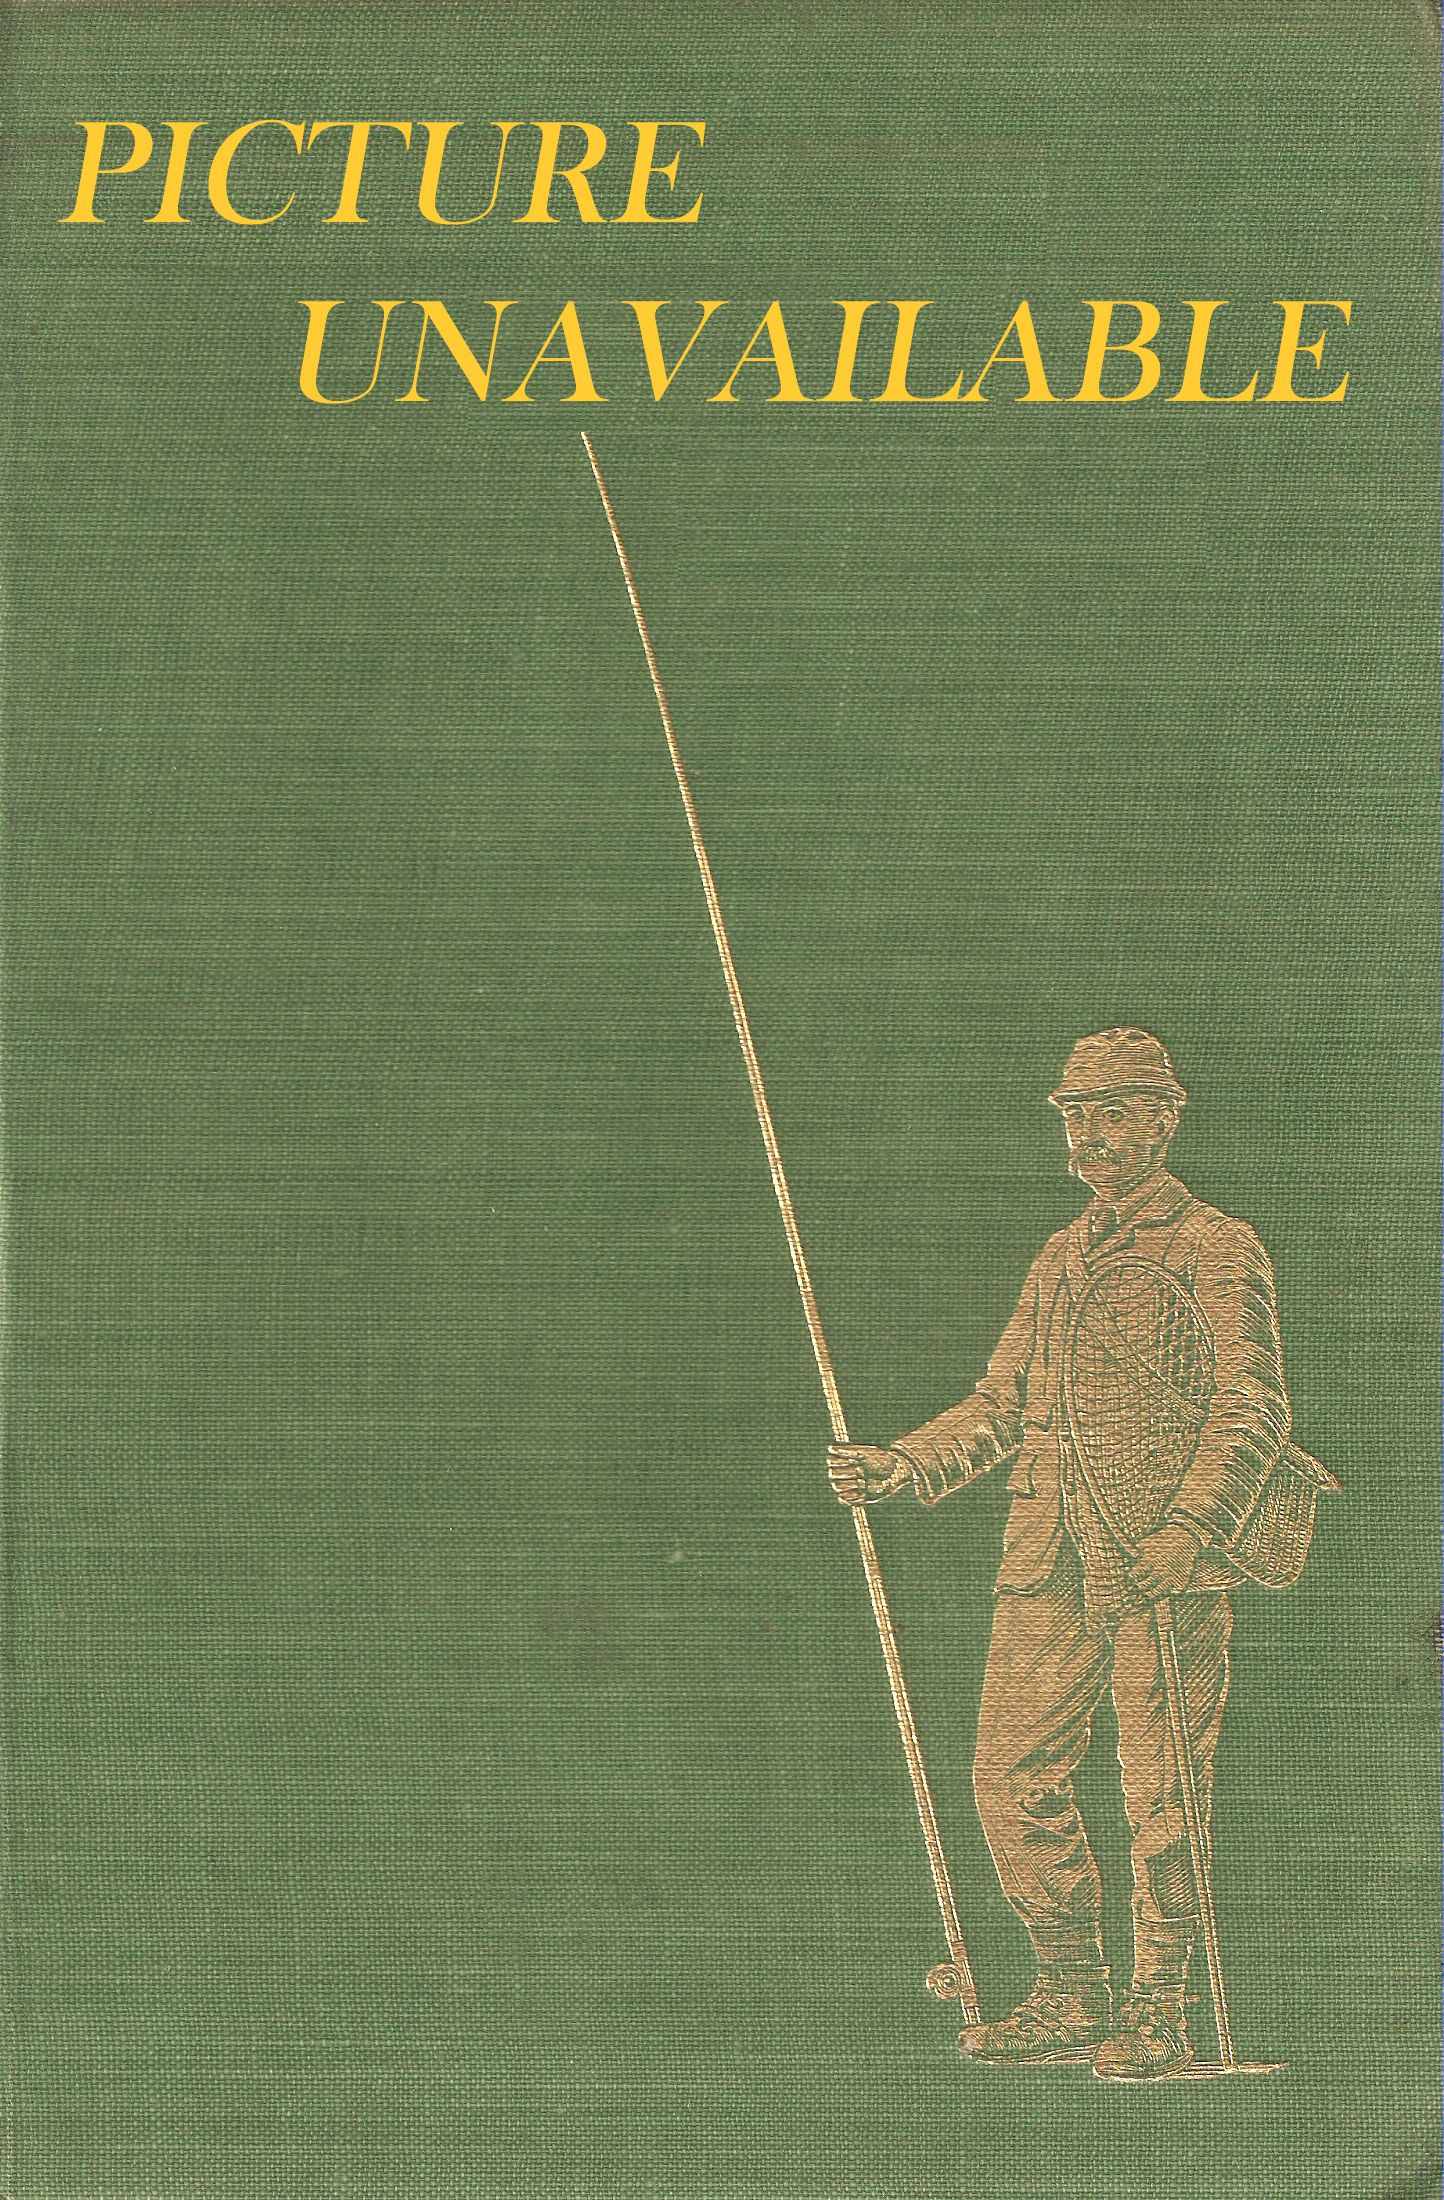 LETTERS OF MY BROTHER JOHN'S LIFE IN THE KLONDIKE. Compiled by The Irish  Fly Fishing and Game Shooting Museum.